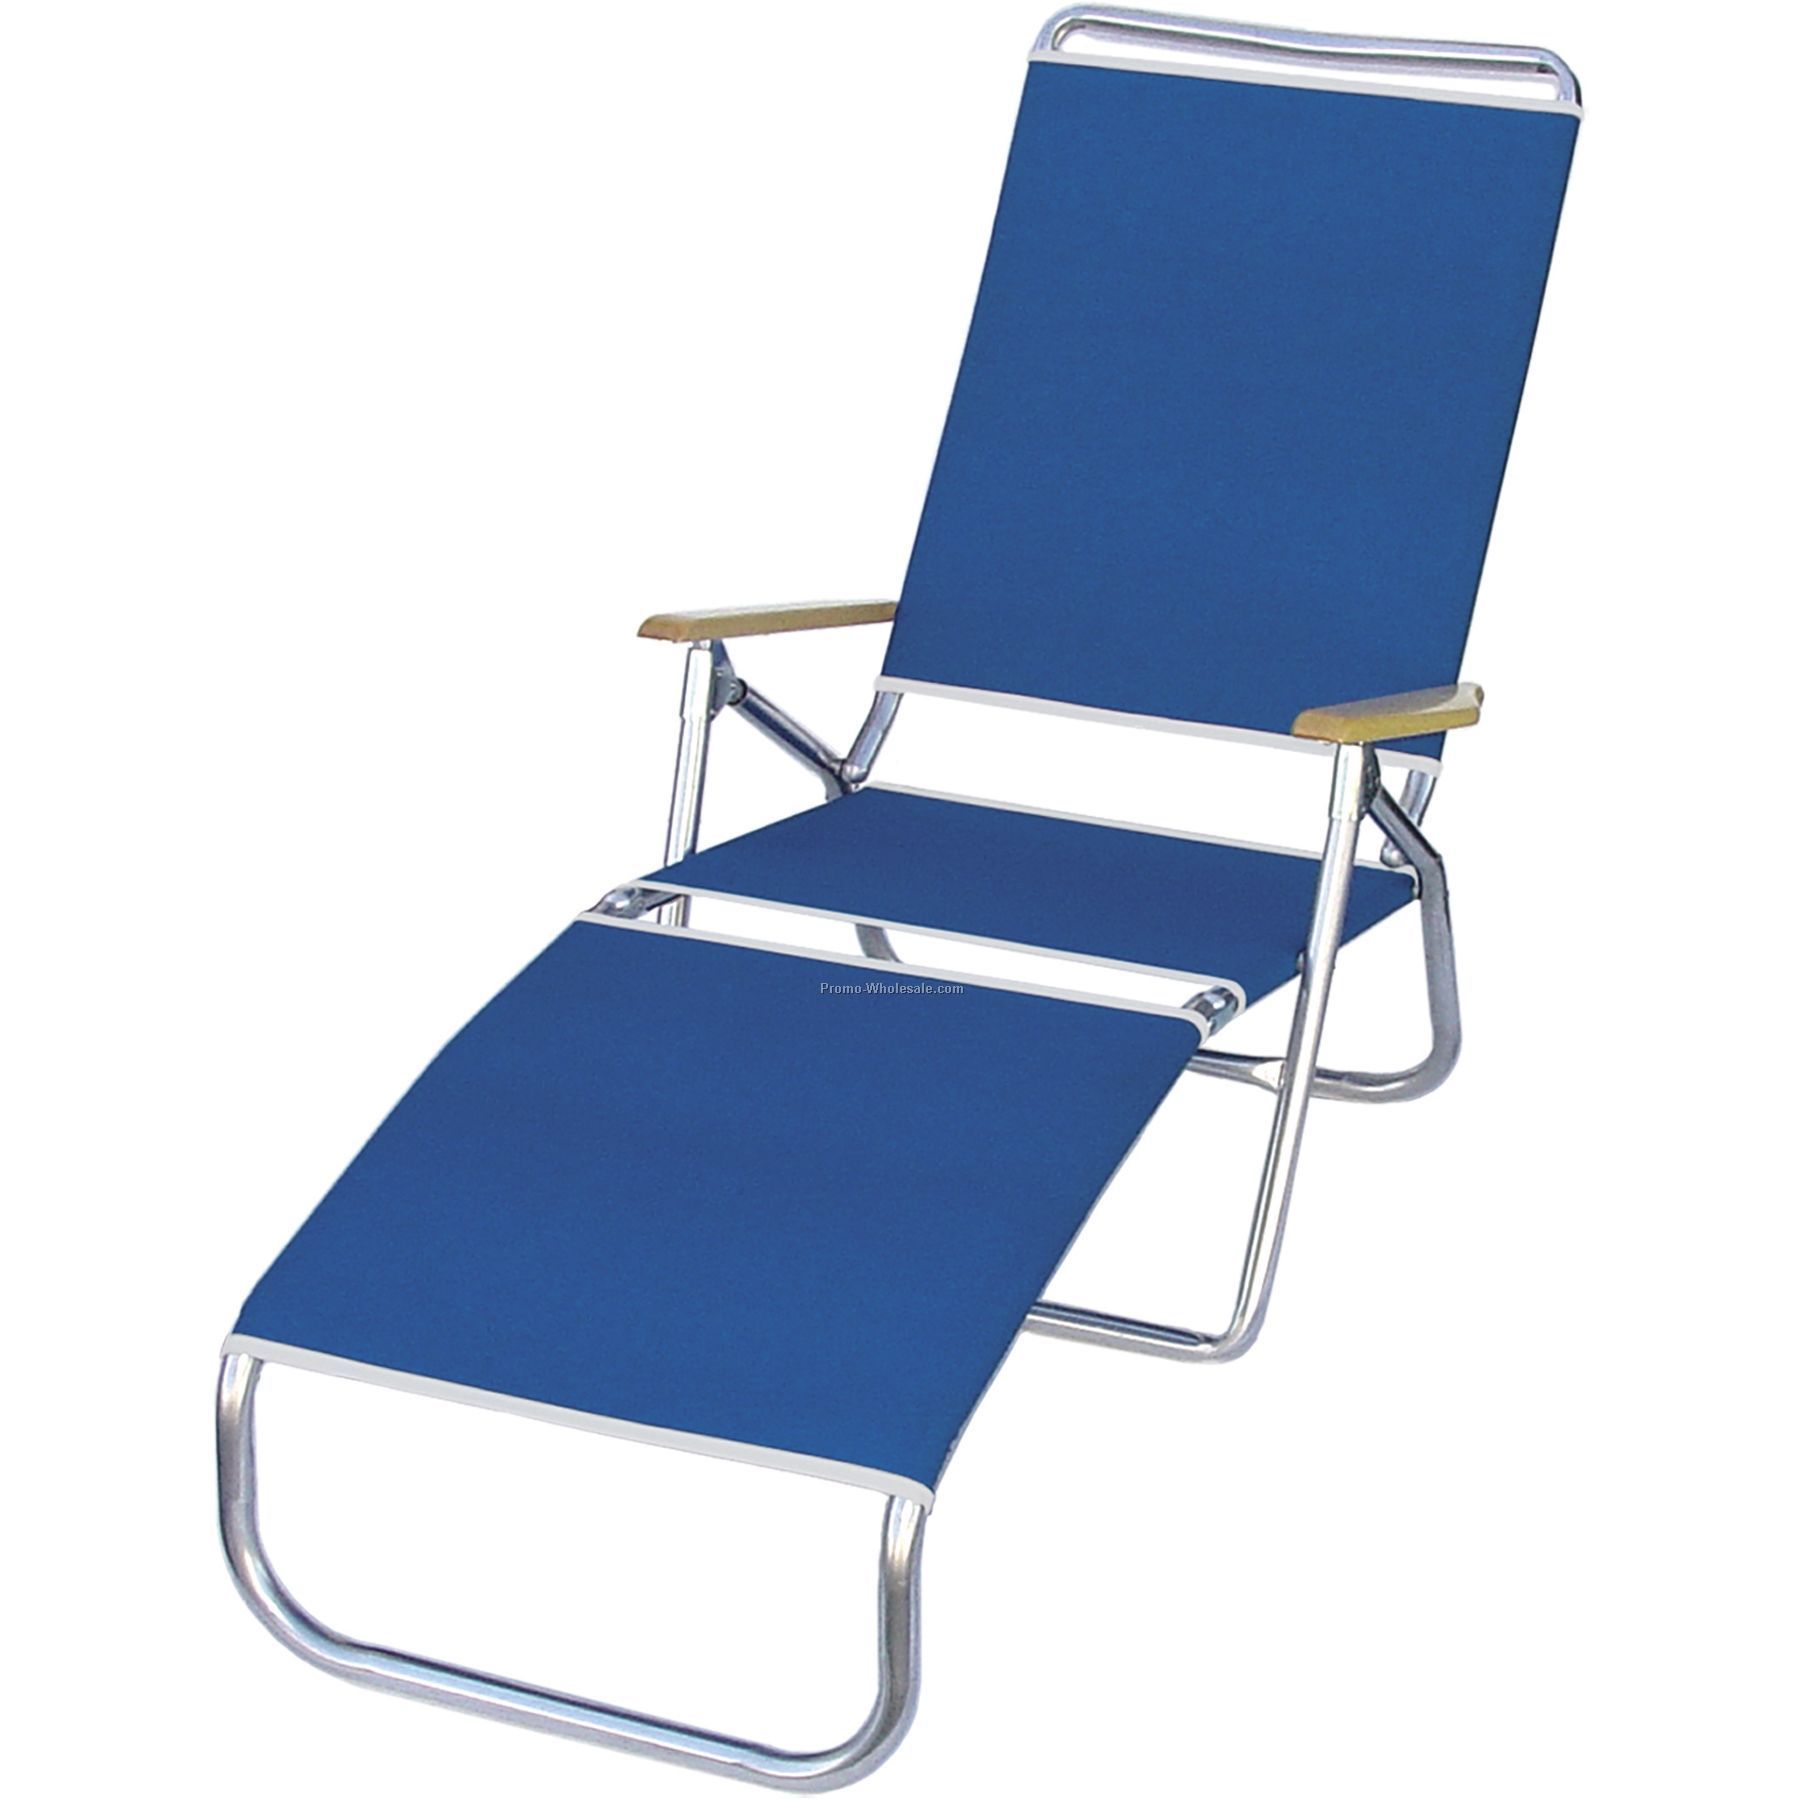 Deluxe 3-position Chaise Lounger W/ Wood Arm Rests - Us Made